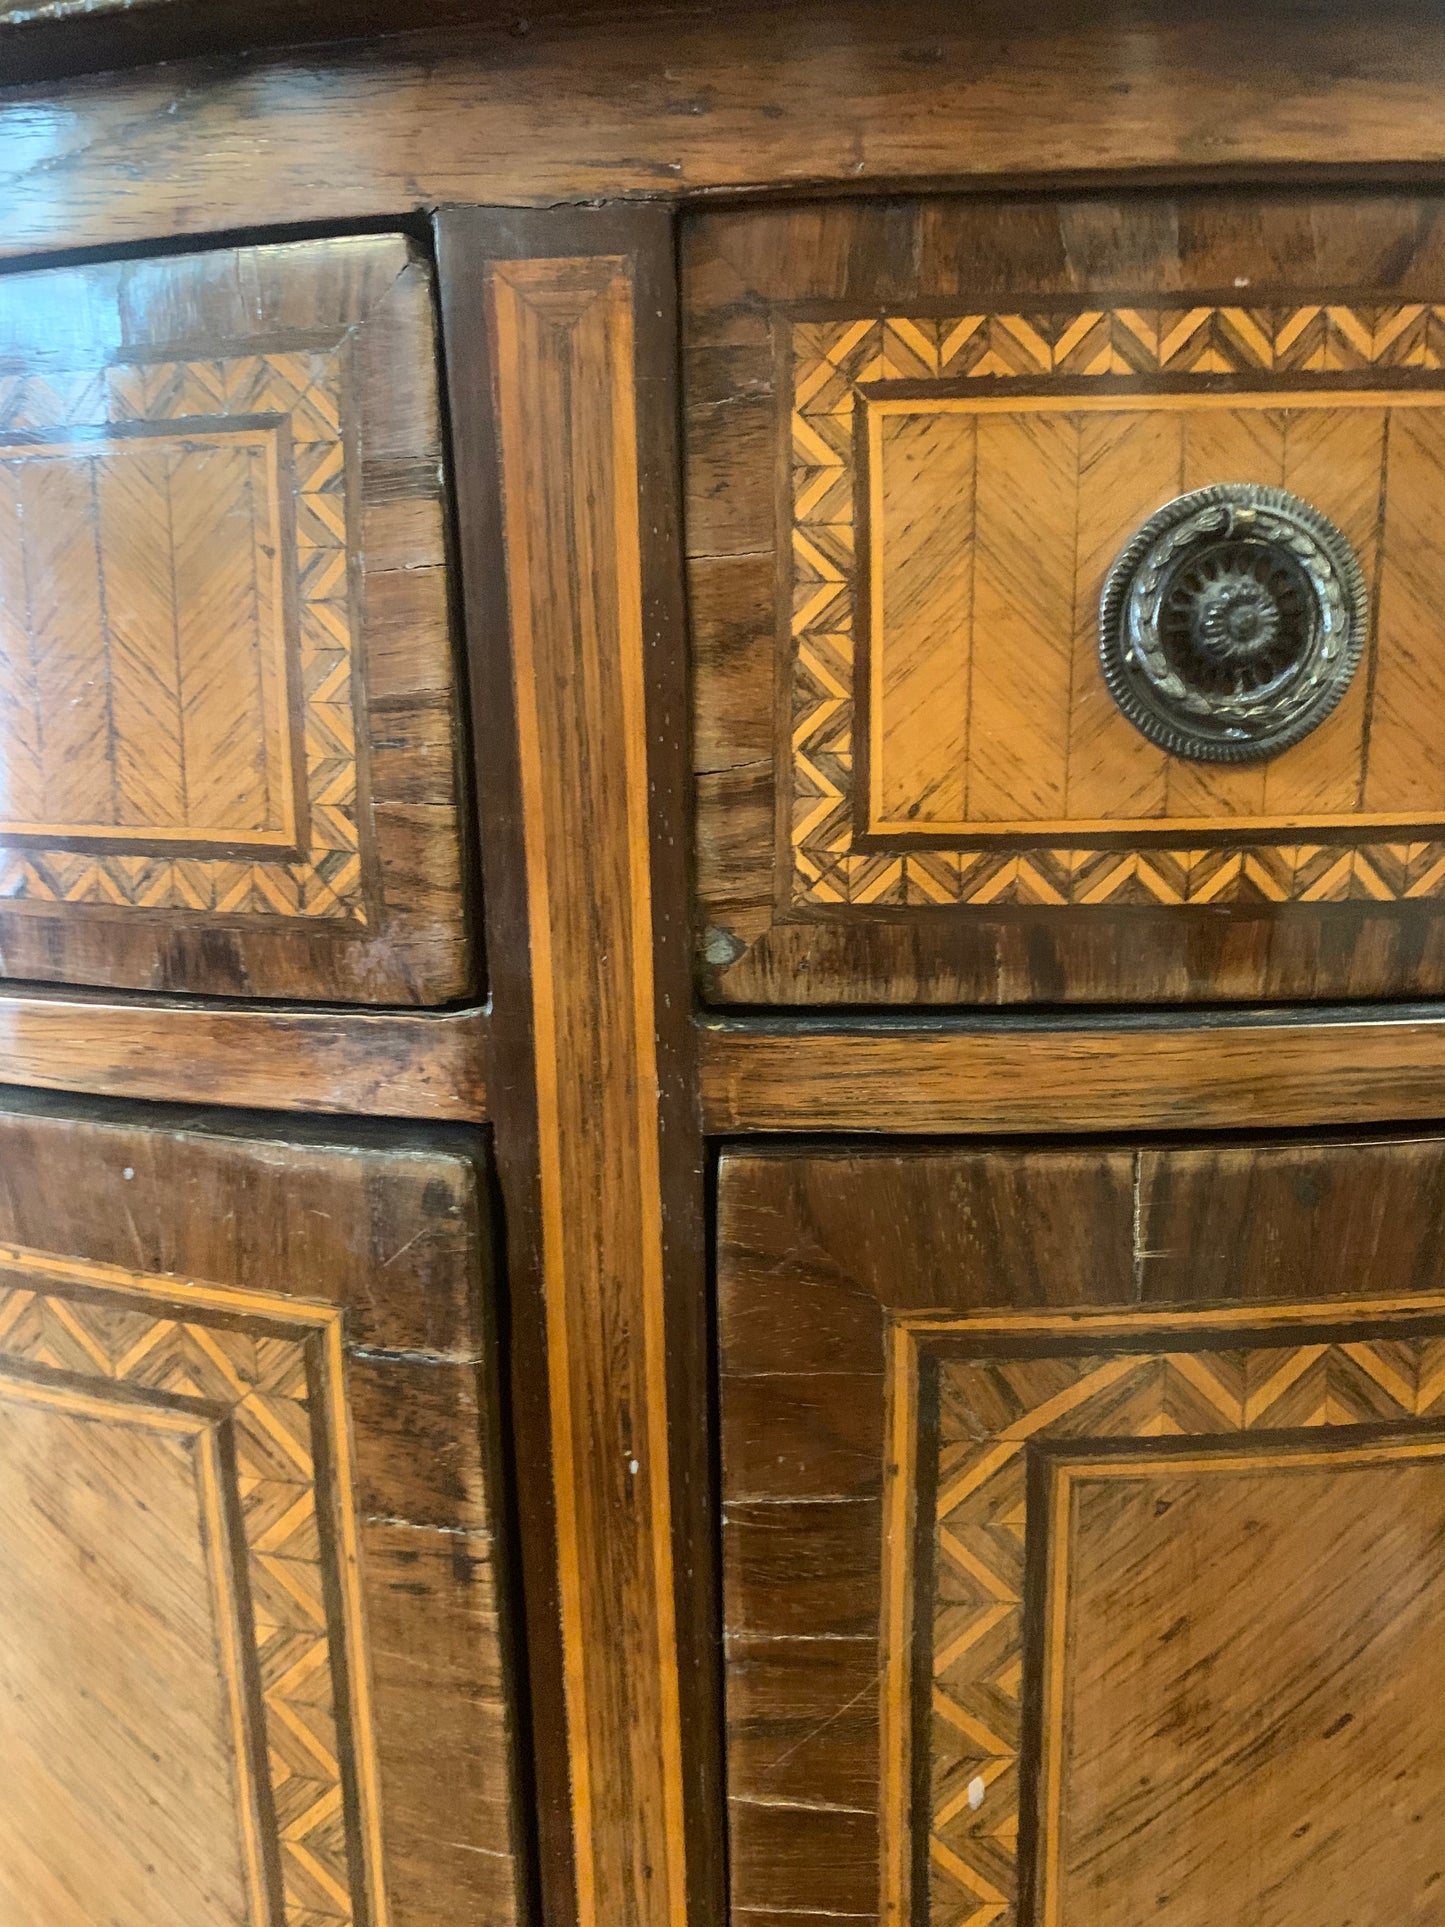 Late XVIII century Demilune Sideboard Veneered and Inlaid in different woods.